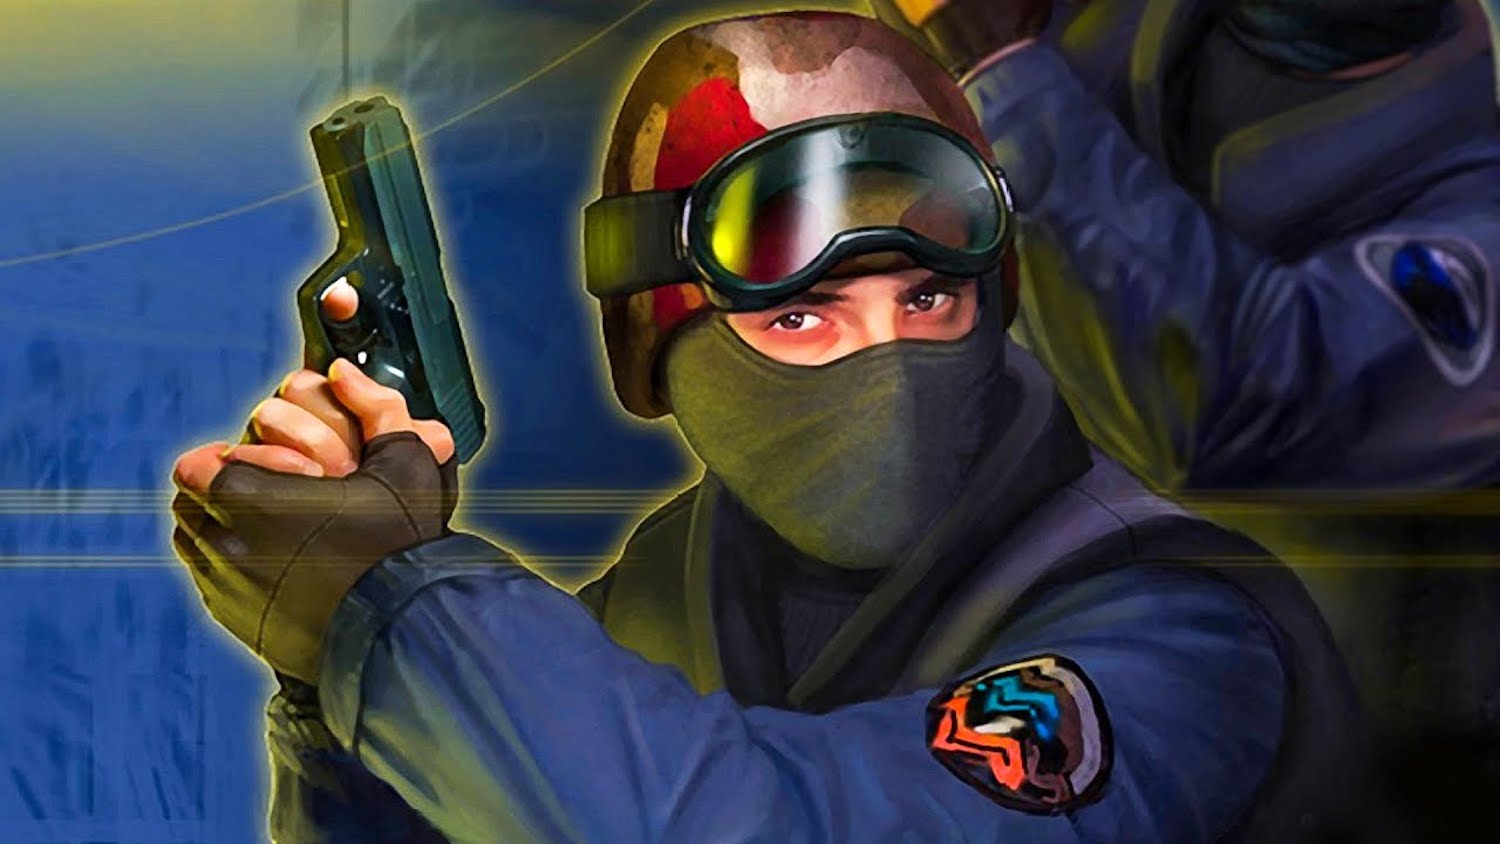 Counter-Strike: Evolving Through the Ages